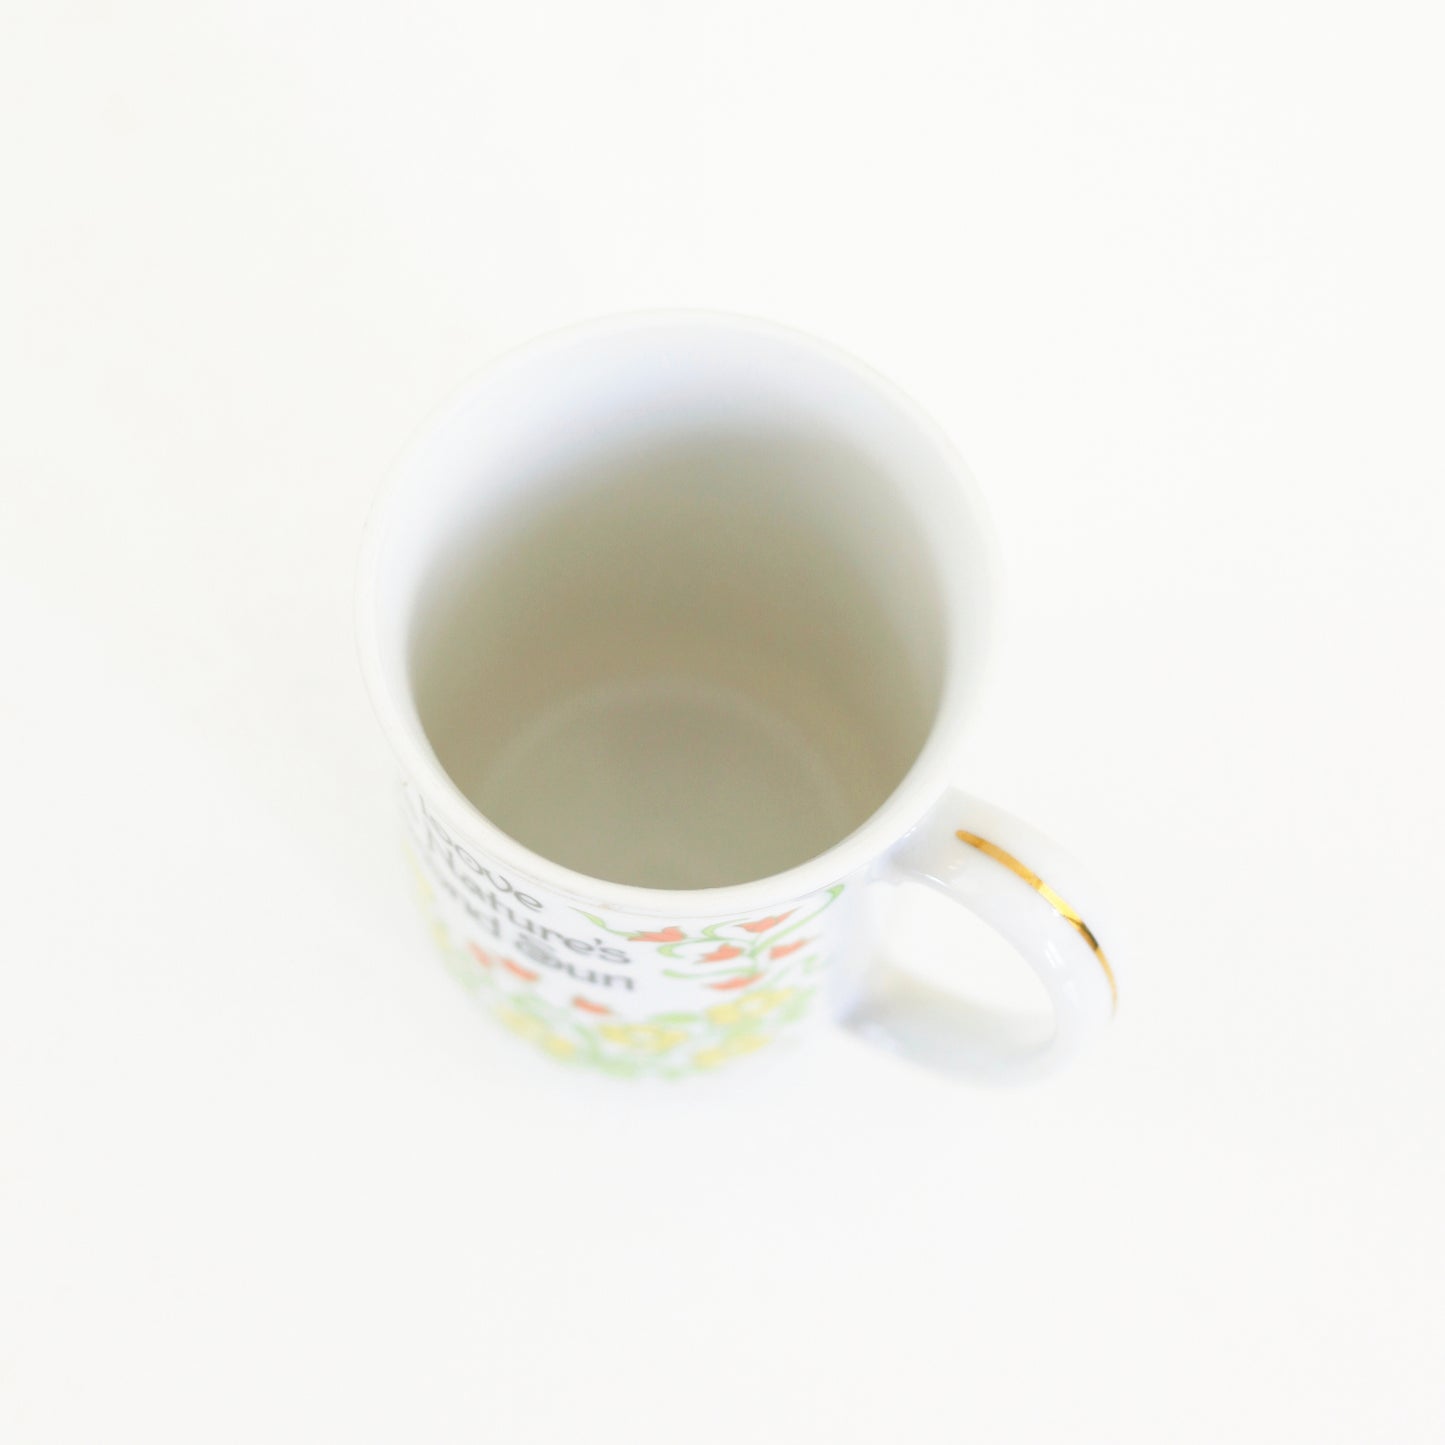 SOLD - Vintage Coffee Mug - Love Is Nature's Second Sun